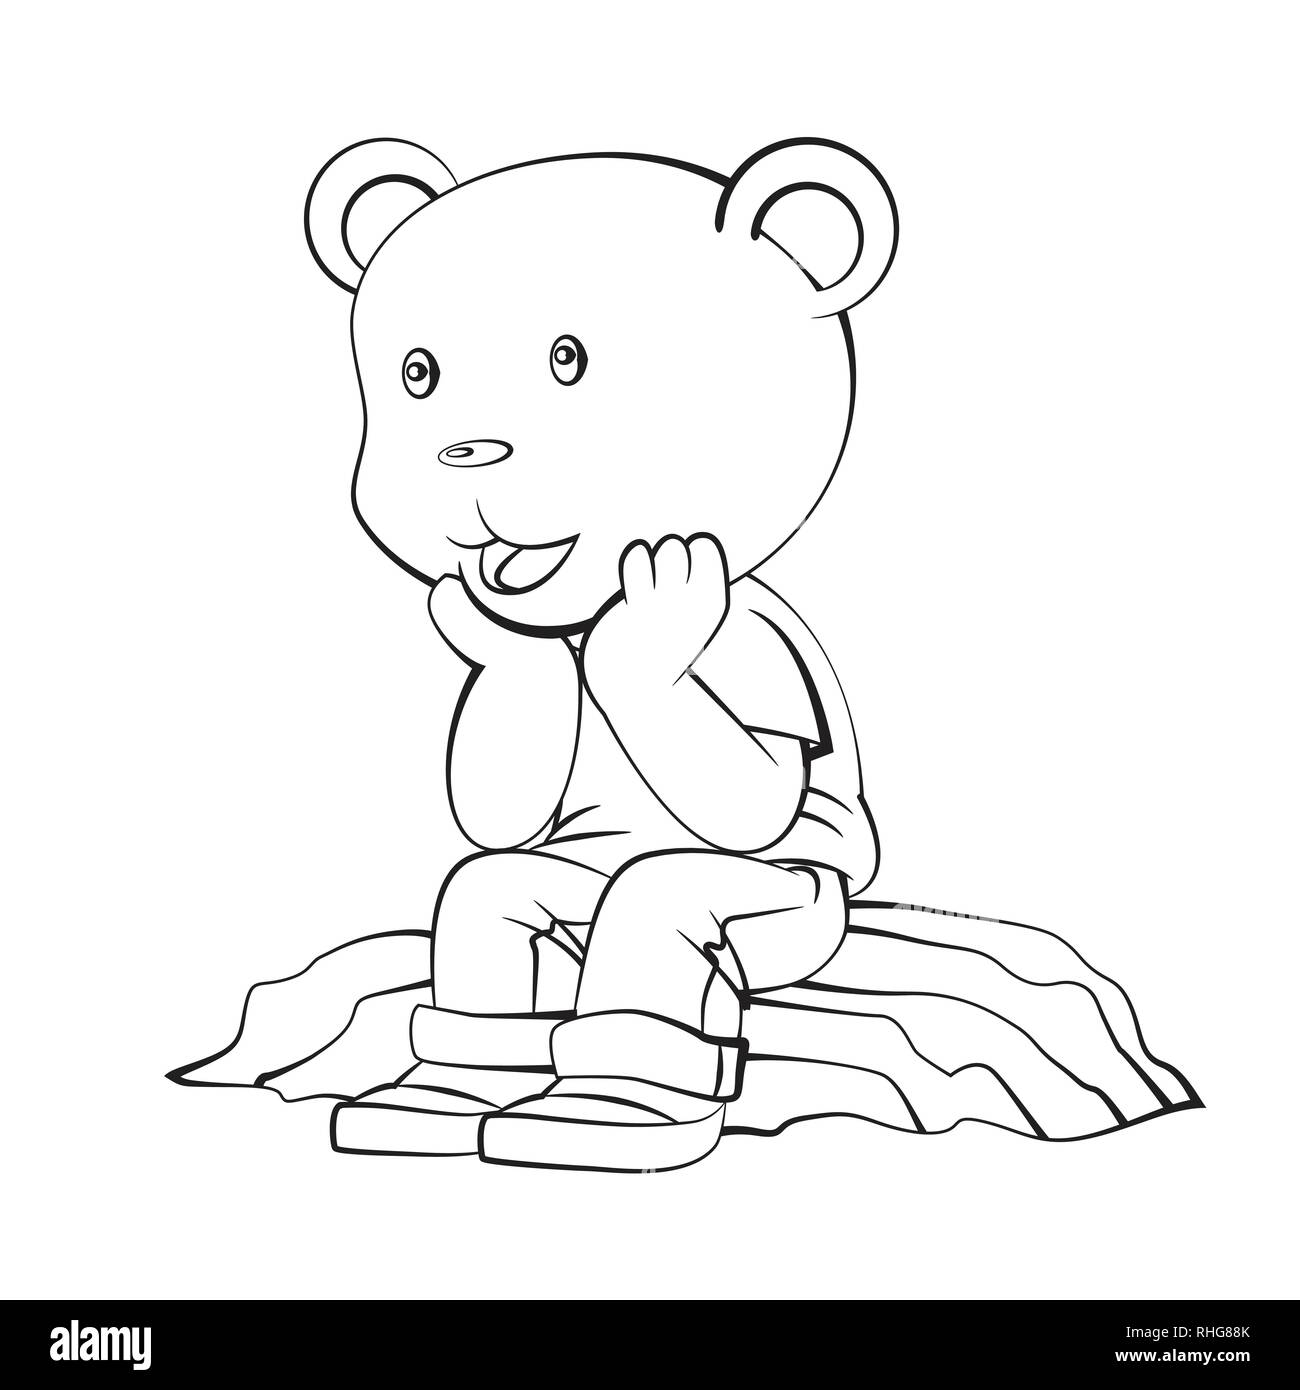 Adorable Cartoon, Boy Bear Standing with thinking. Isolated black and white, Hand drawn cartoon character design. Vector clip art illustration Stock Vector